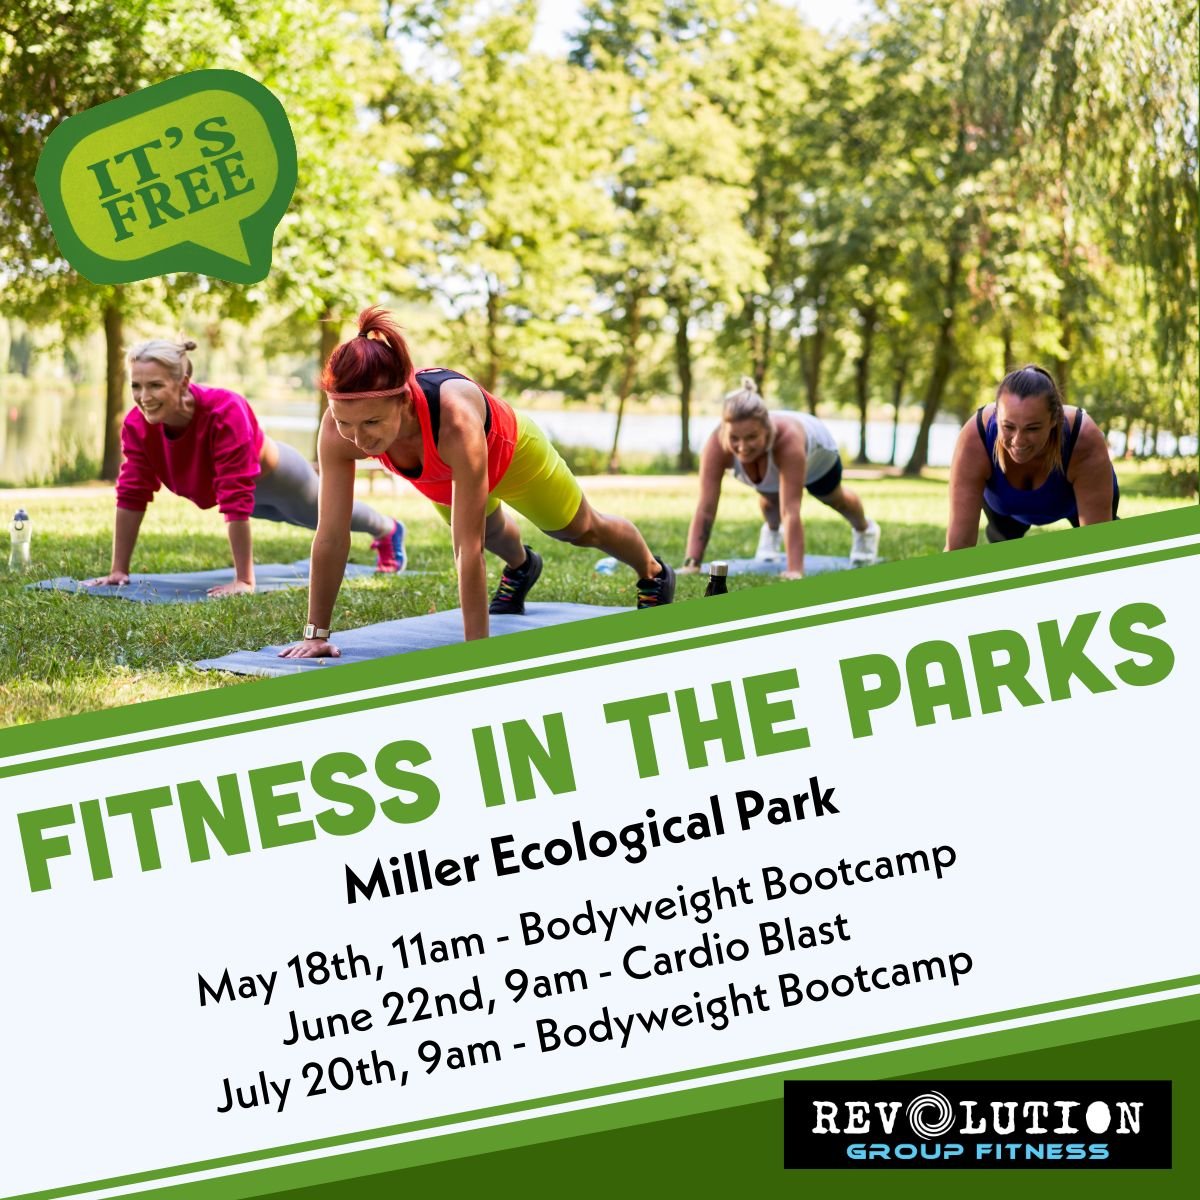 🌿 Step into nature and step up your fitness game with us at Miller Ecological Park! 🌳 We've partnered with the City of Lebanon for their Fitness in the Parks series, offering three fantastic classes this summer. From bodyweight bootcamps to cardio 